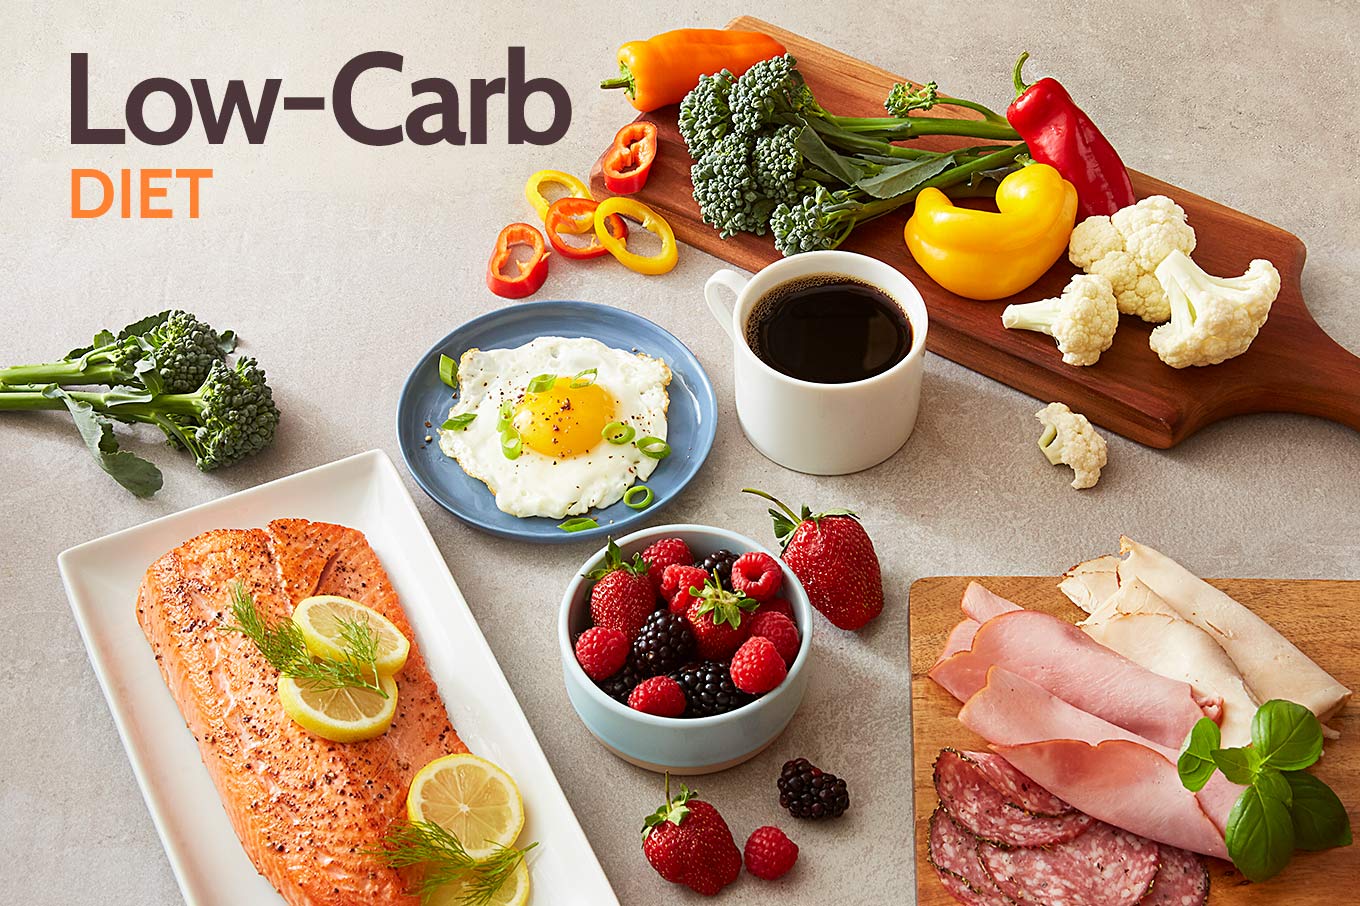 Studies: Low carb diets can reduce the risk of heart disease